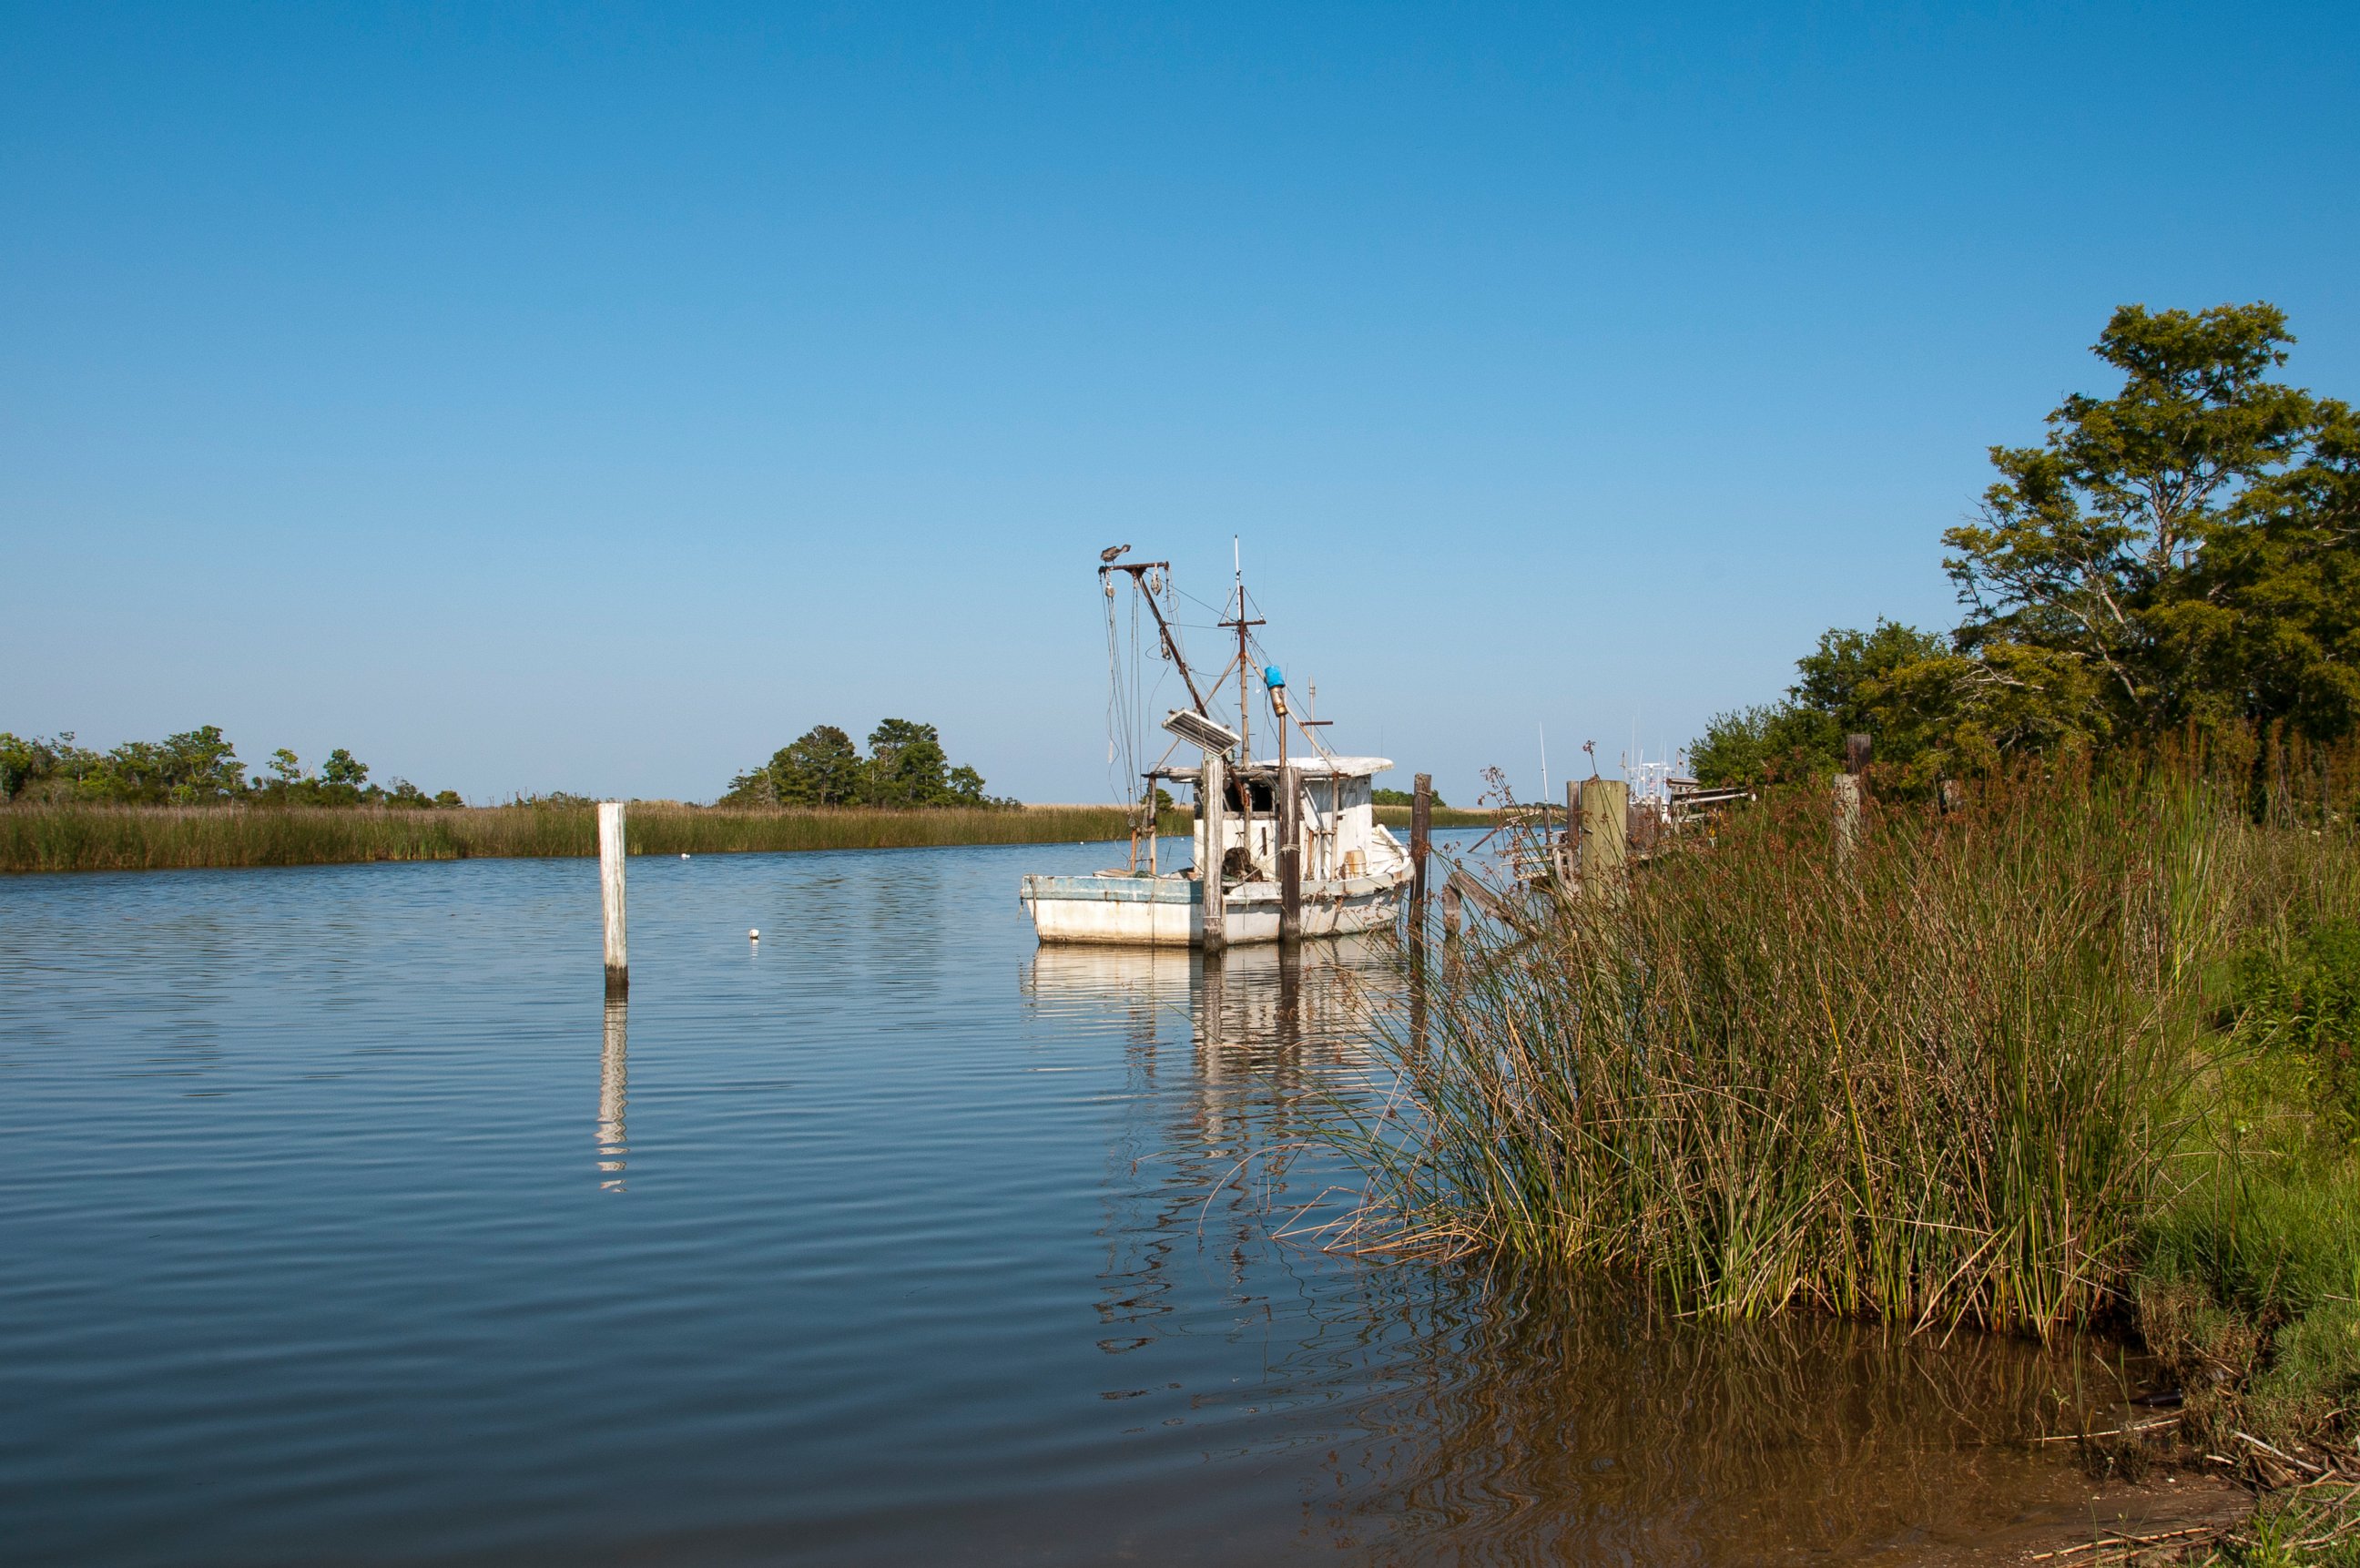 PHOTO: Fishing boat on the Apalachicola River in Florida.